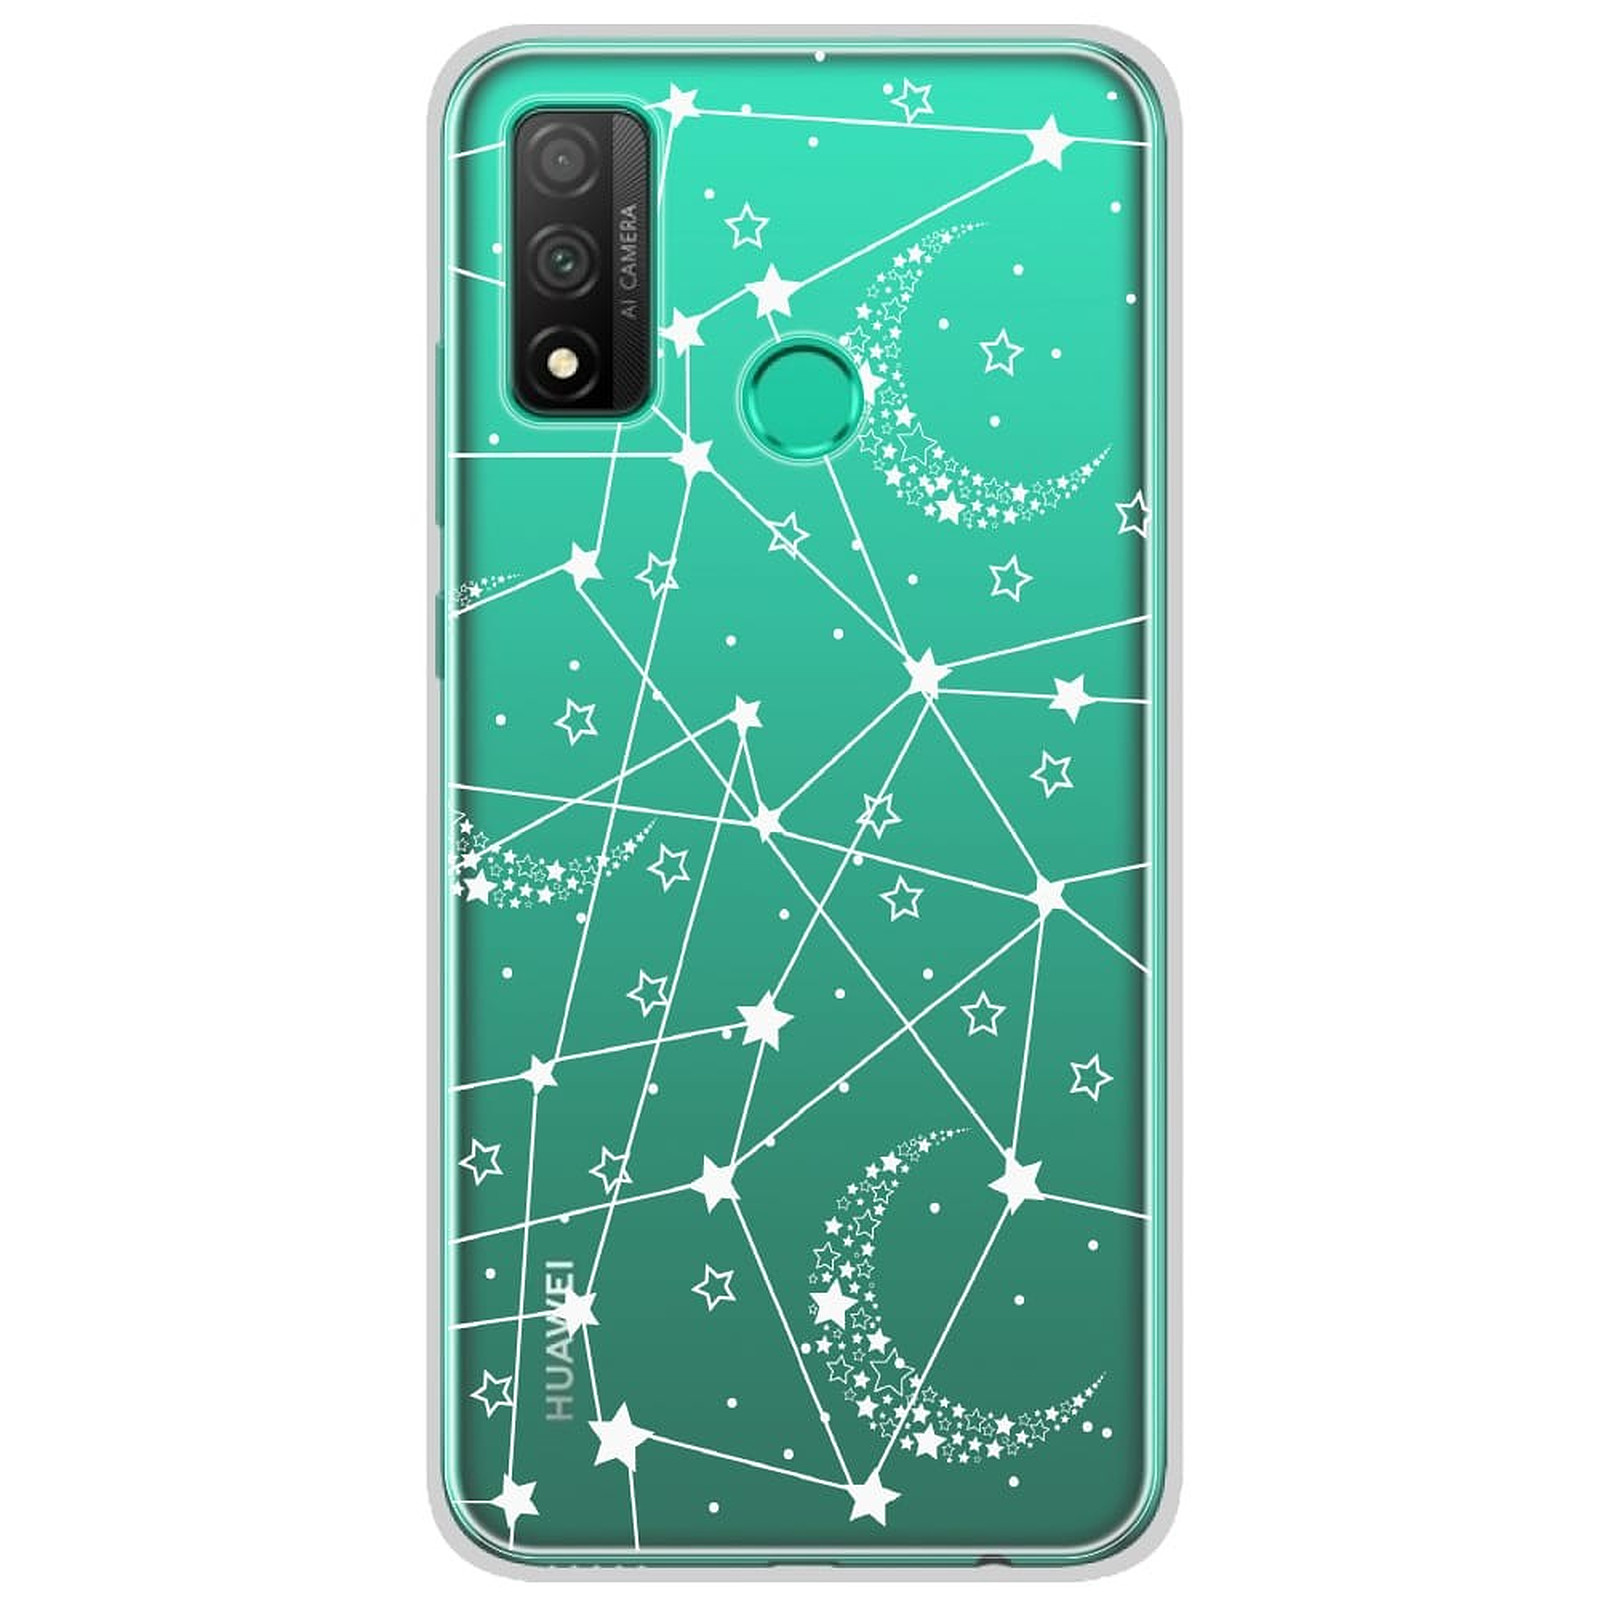 1001 Coques Coque silicone gel Huawei P Smart 2020 motif Lignes etoilees - Coque telephone 1001Coques